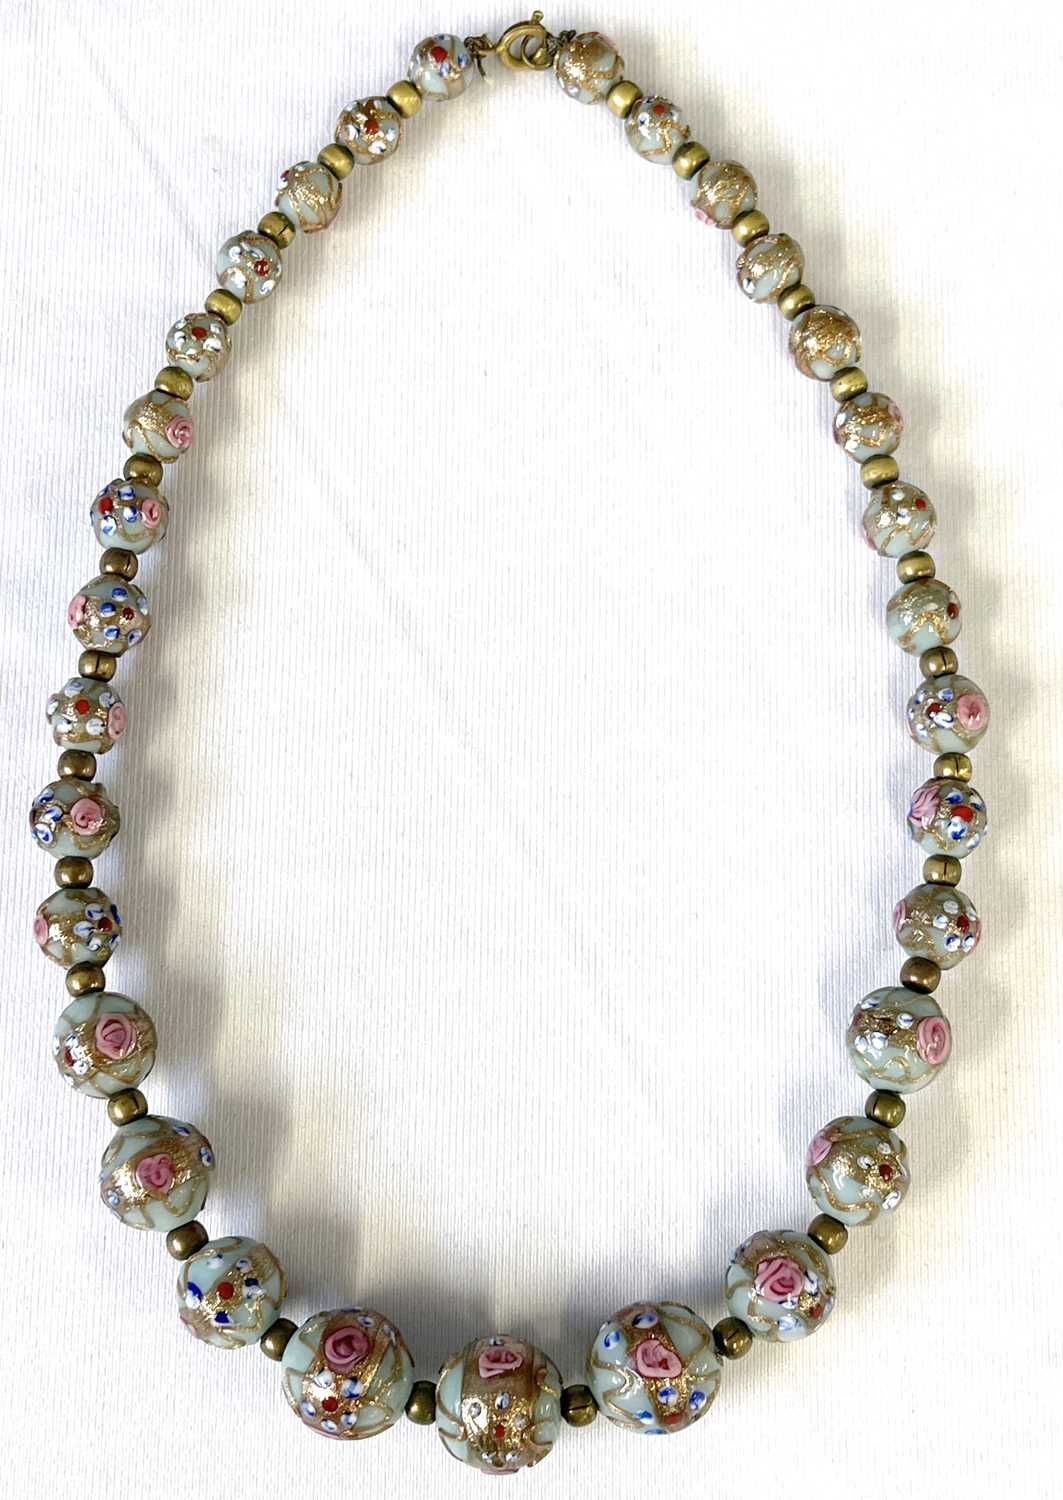 A 1950's graduated Murano glass bead necklace with hand painted floral patterns on aqua ground